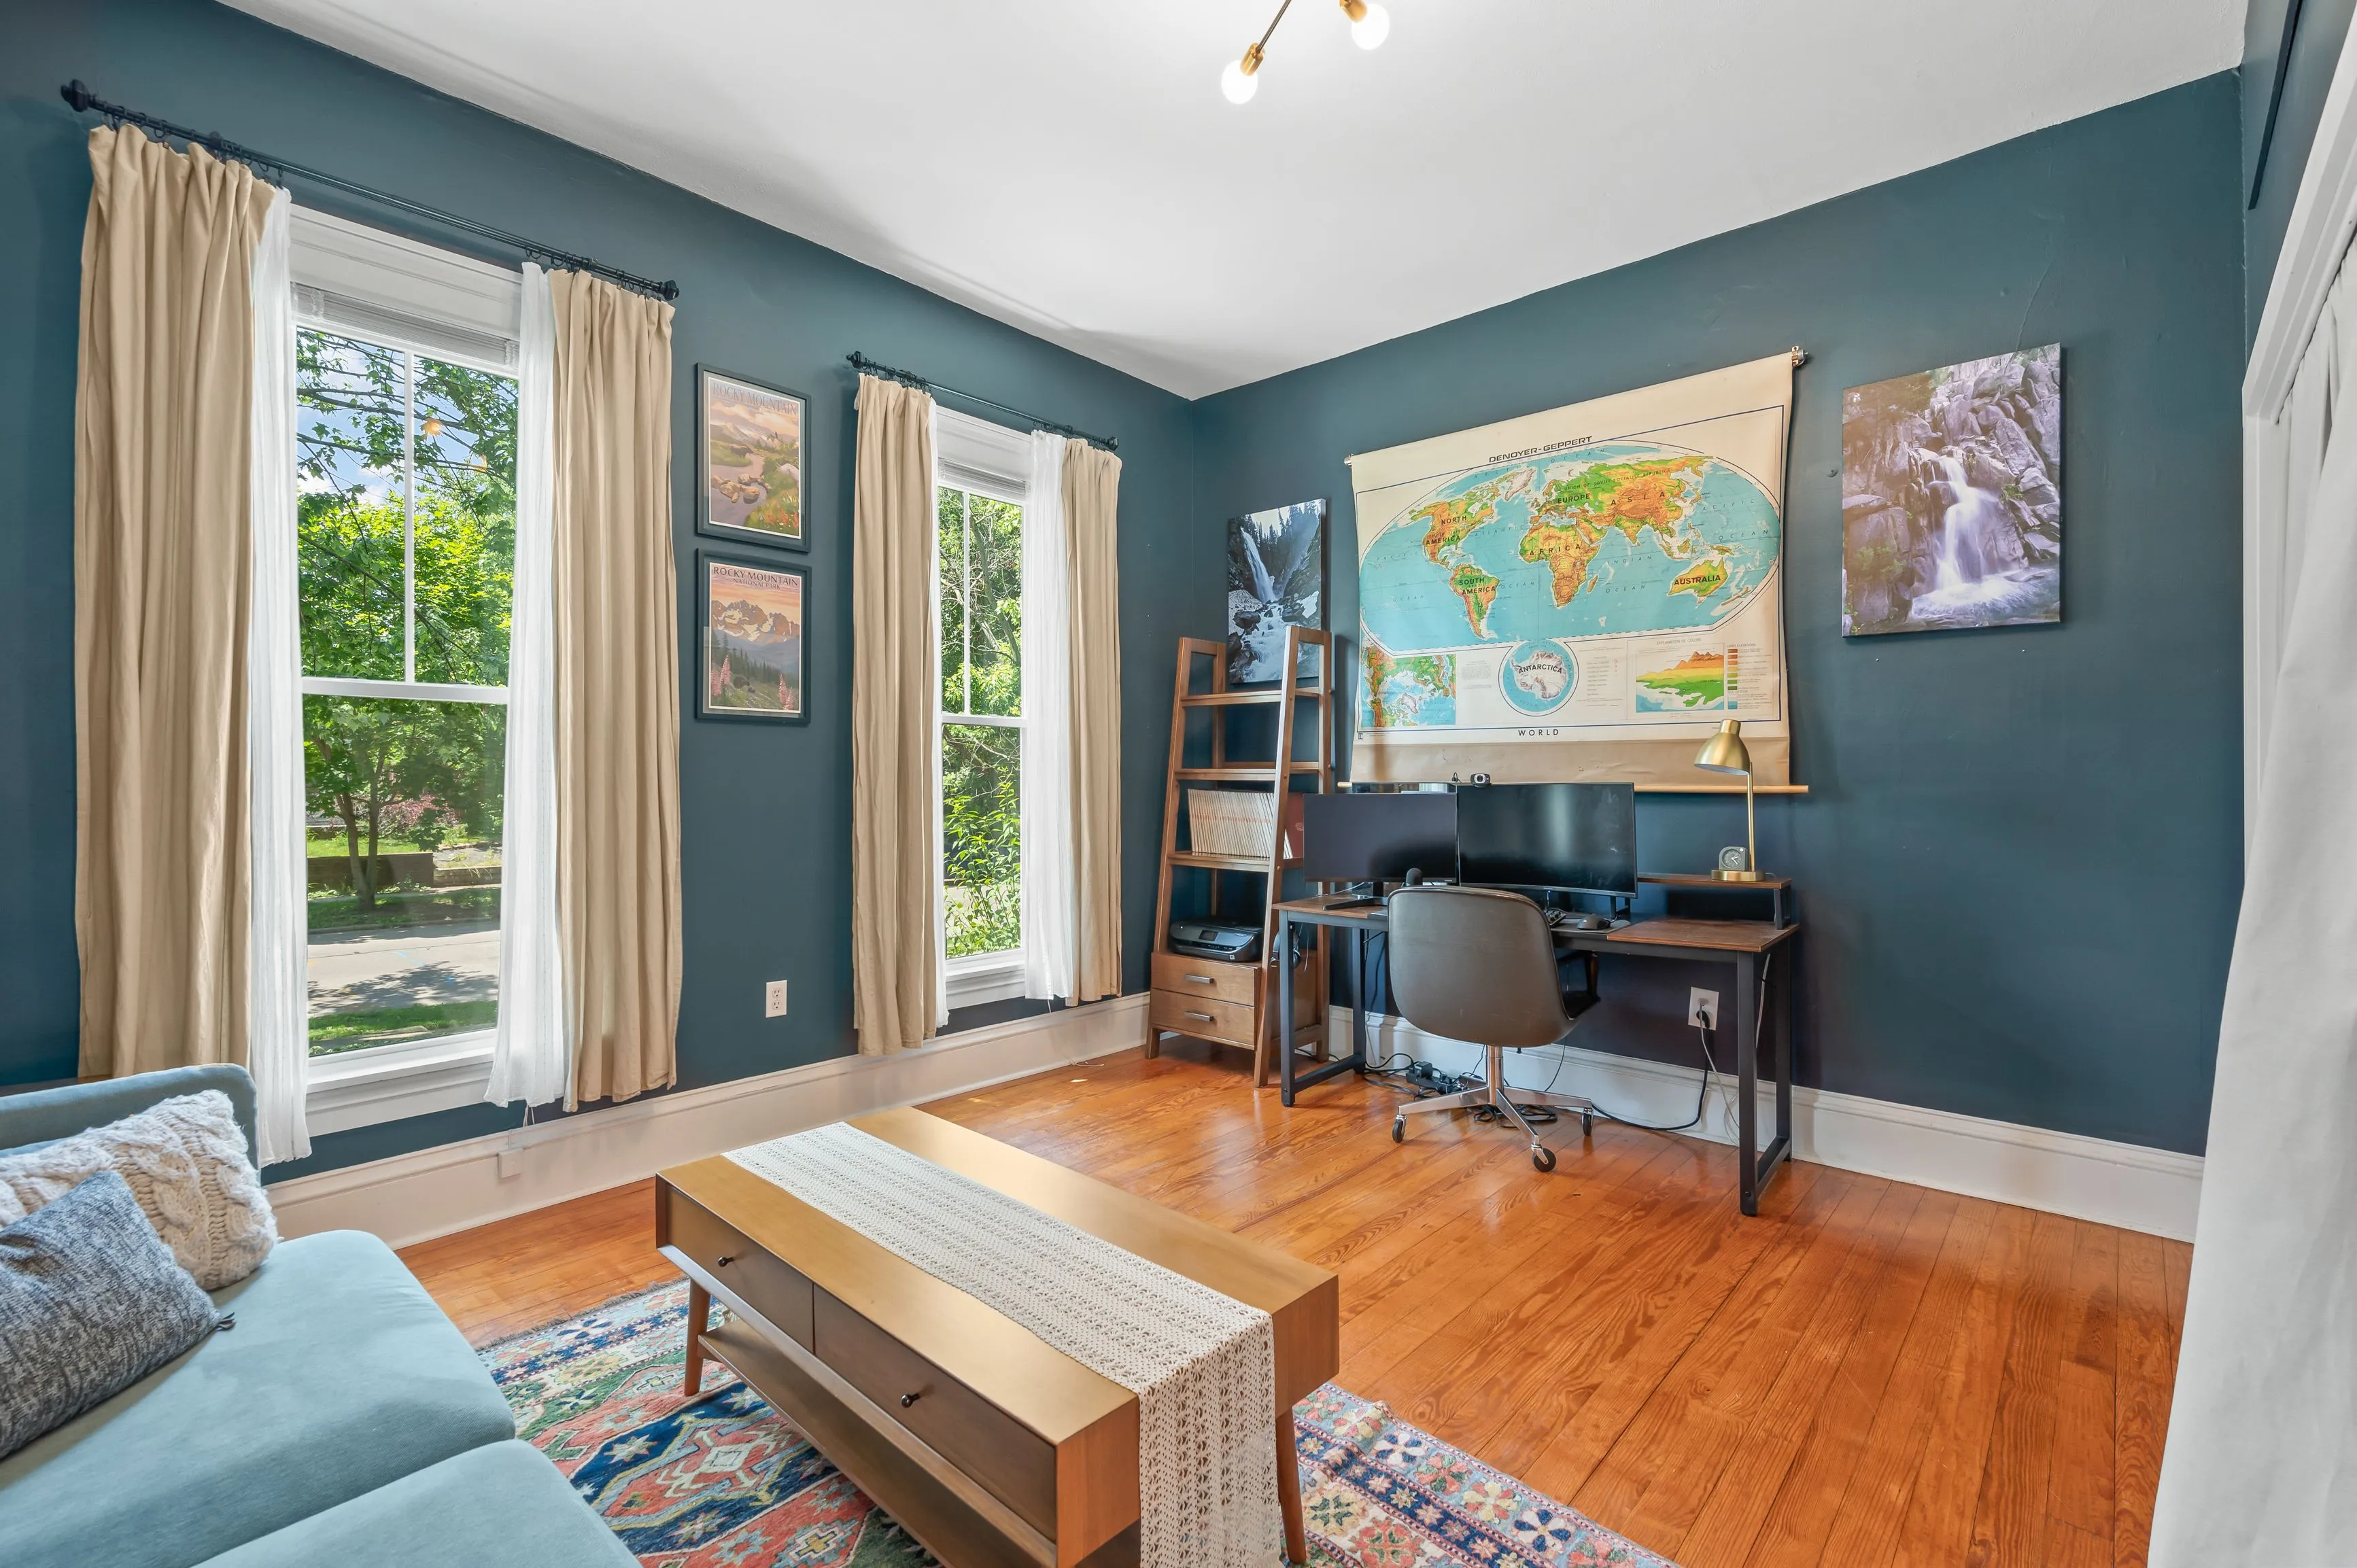 Cozy living room with hardwood floors, a blue sofa, wooden coffee table, and a world map hanging above a computer desk by the window.